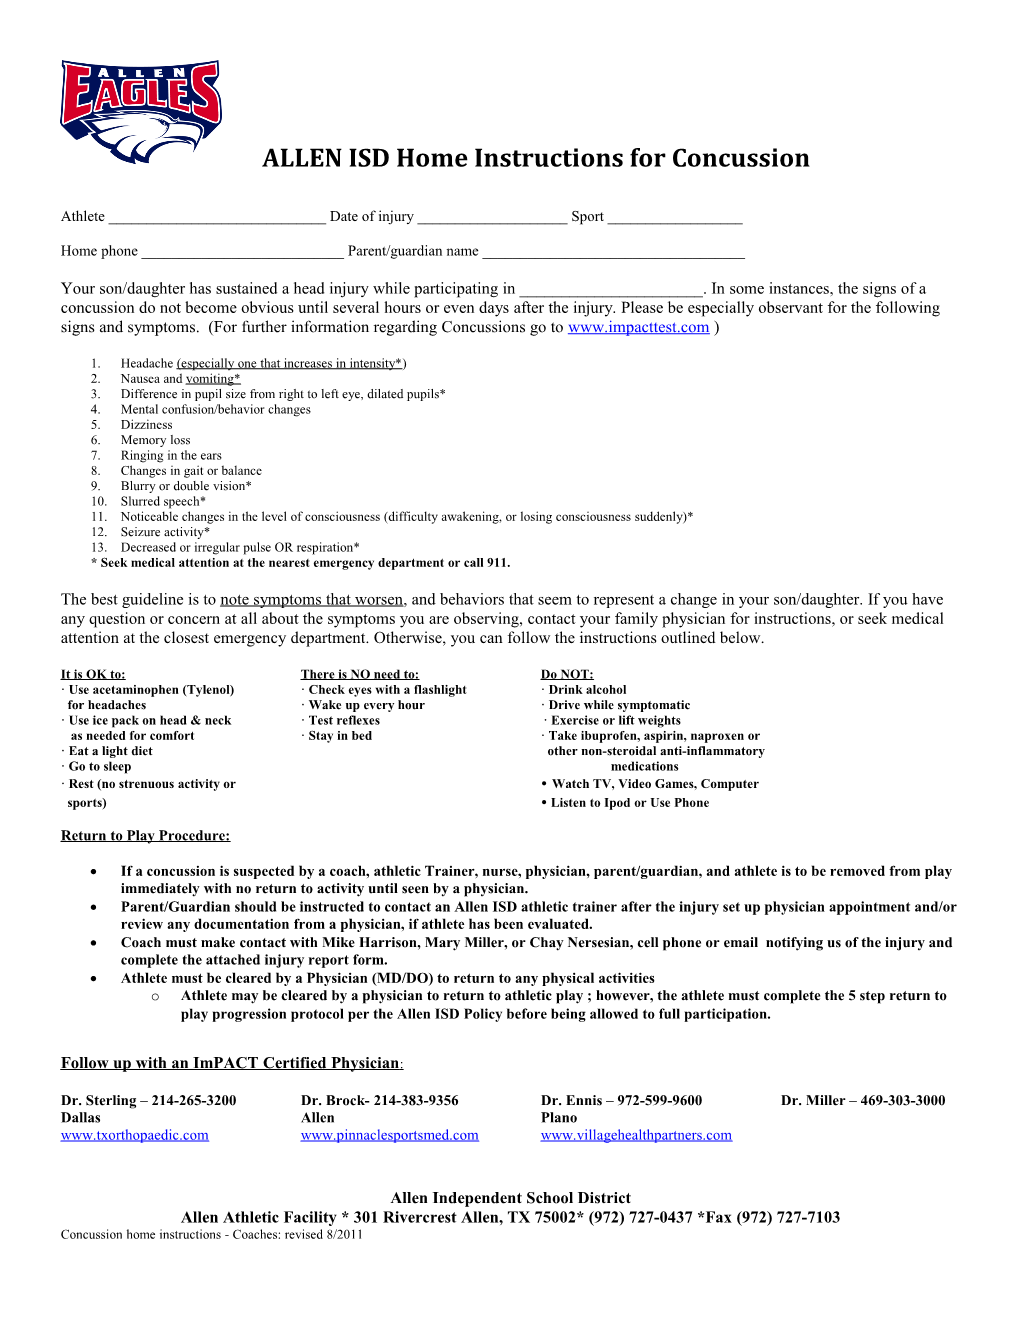 ALLEN ISD Home Instructions for Concussion